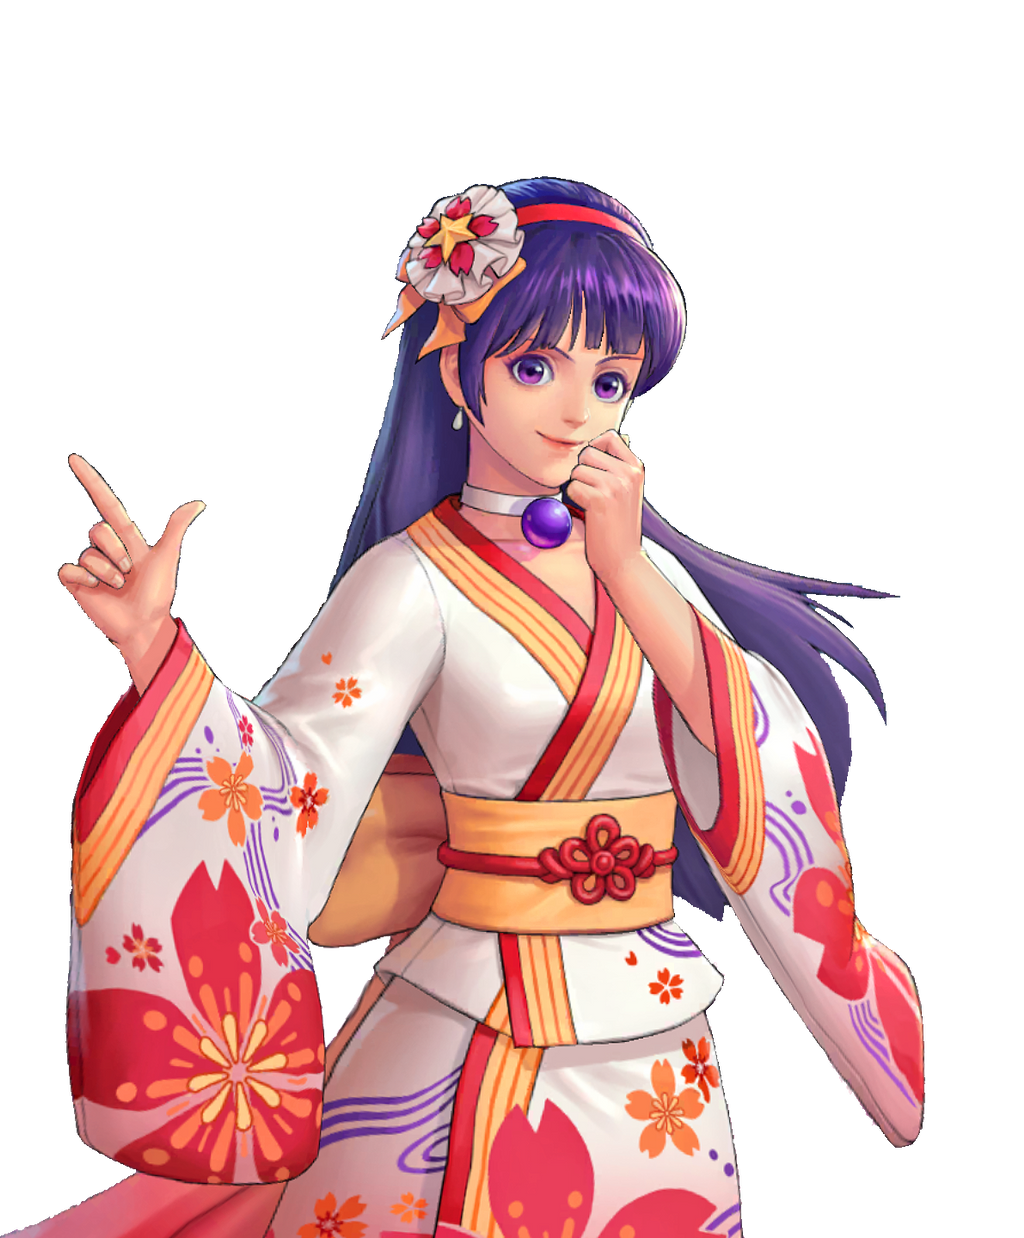 King of Fighters 97 Athena Asamiya by hes6789 on DeviantArt